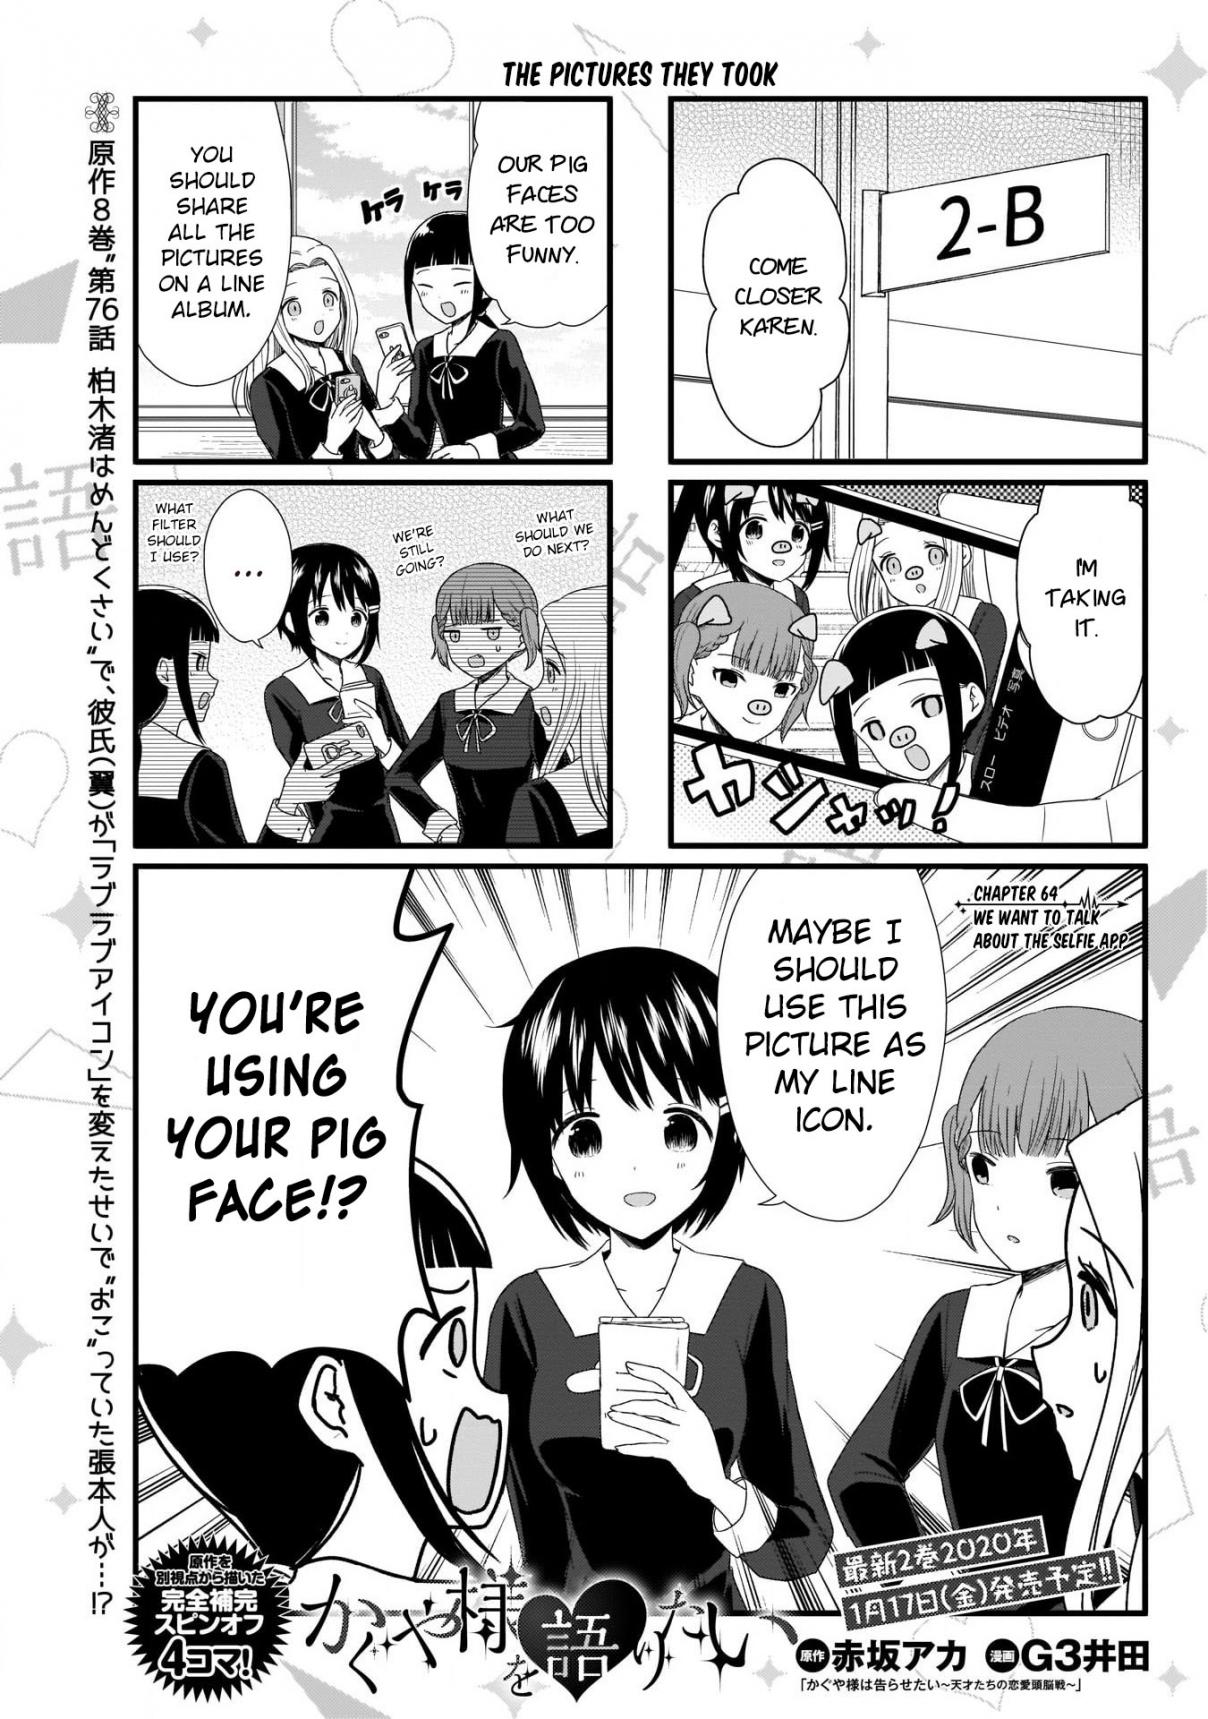 We Want To Talk About Kaguya Ch. 64 We Want To Talk About the Selfie App